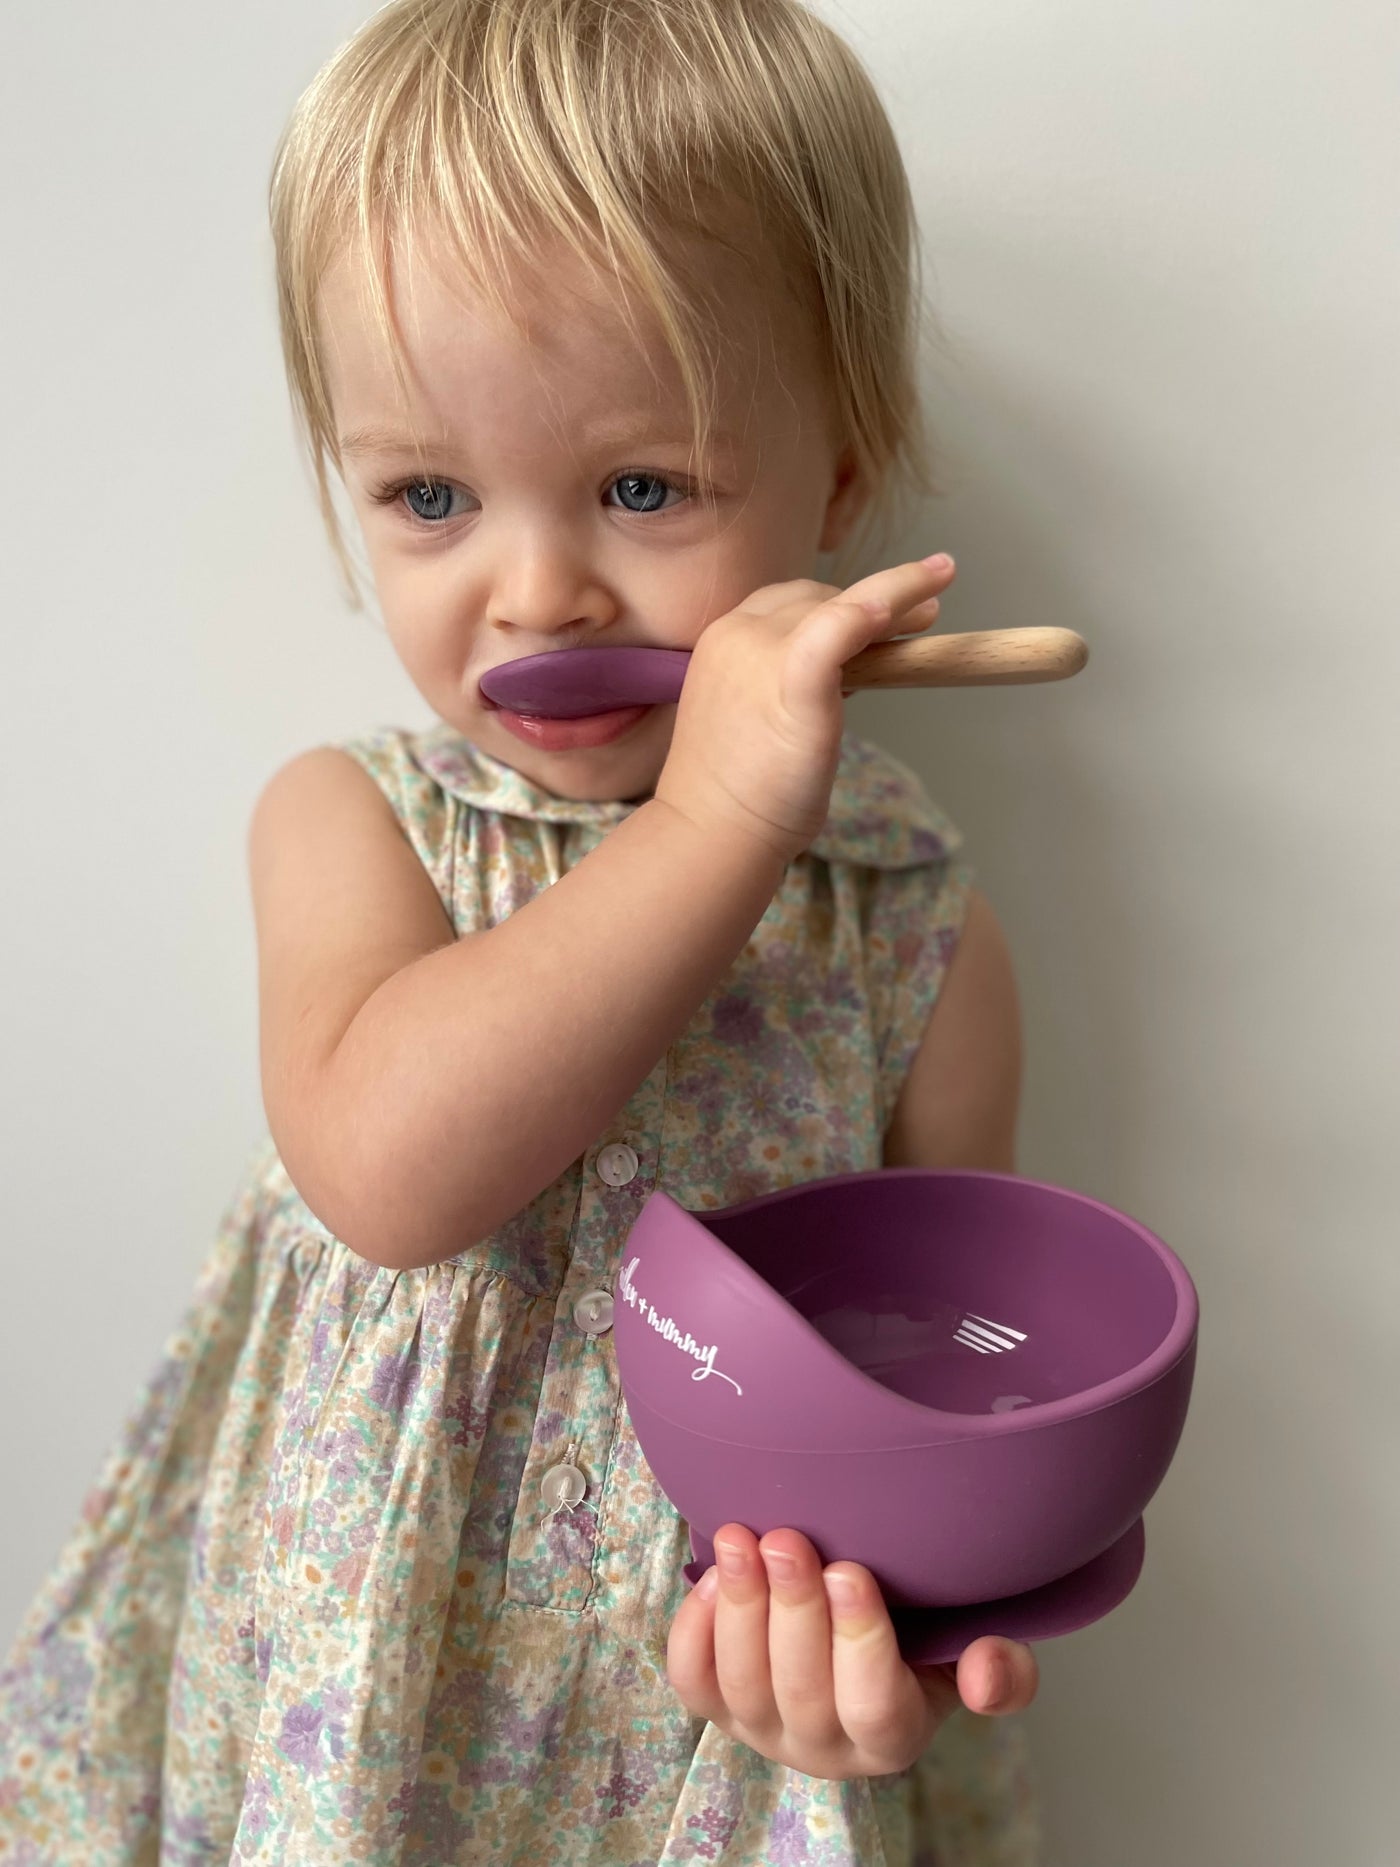 Toddler holding plum silicone suction bowl